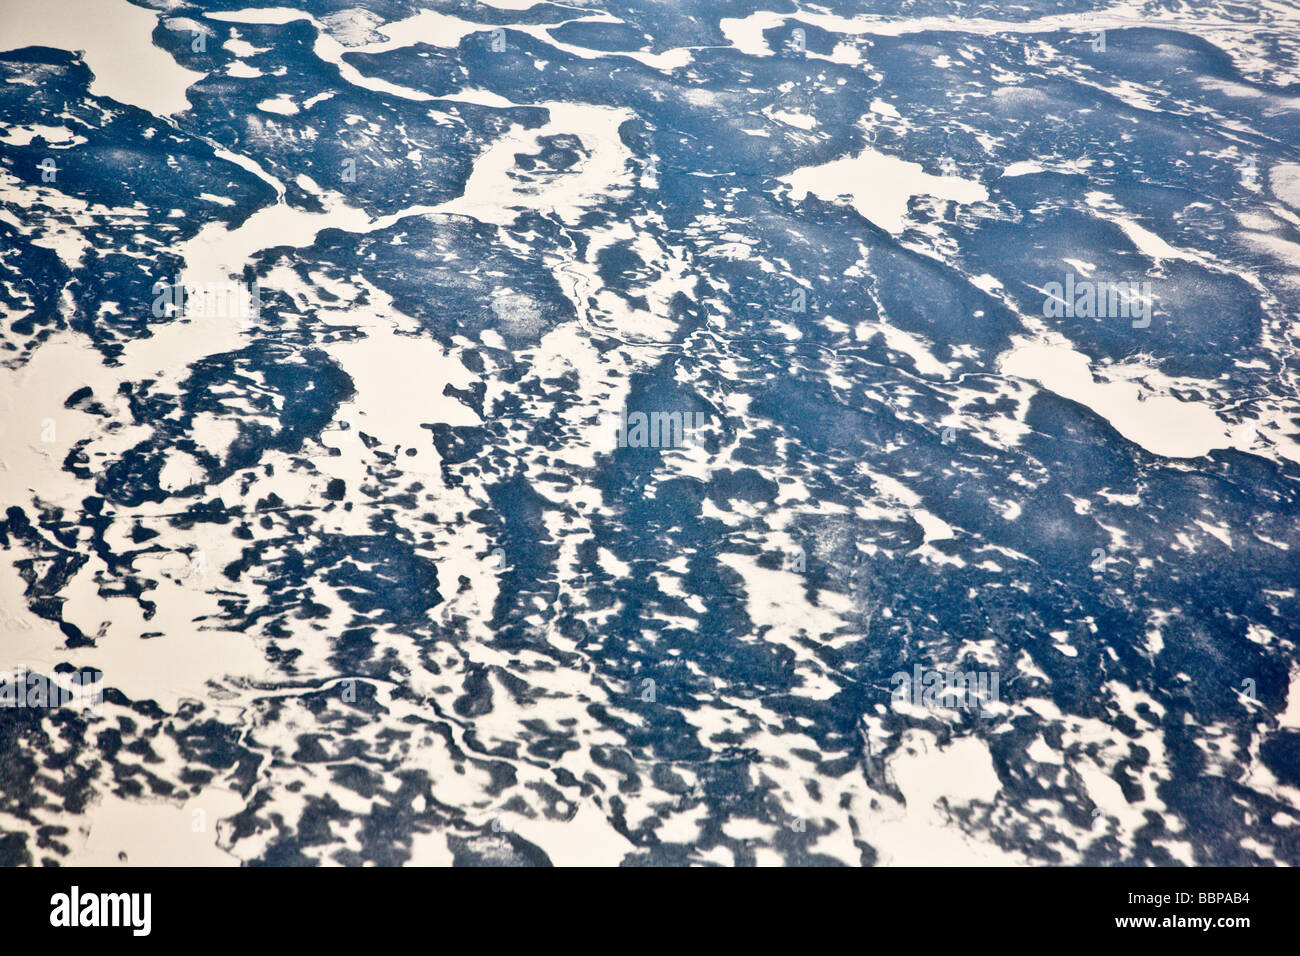 The awe-inspiring polar ice cap can be seen in this view from a plane, traveling from Frankfurt, Germany, to Washington, DC. Stock Photo